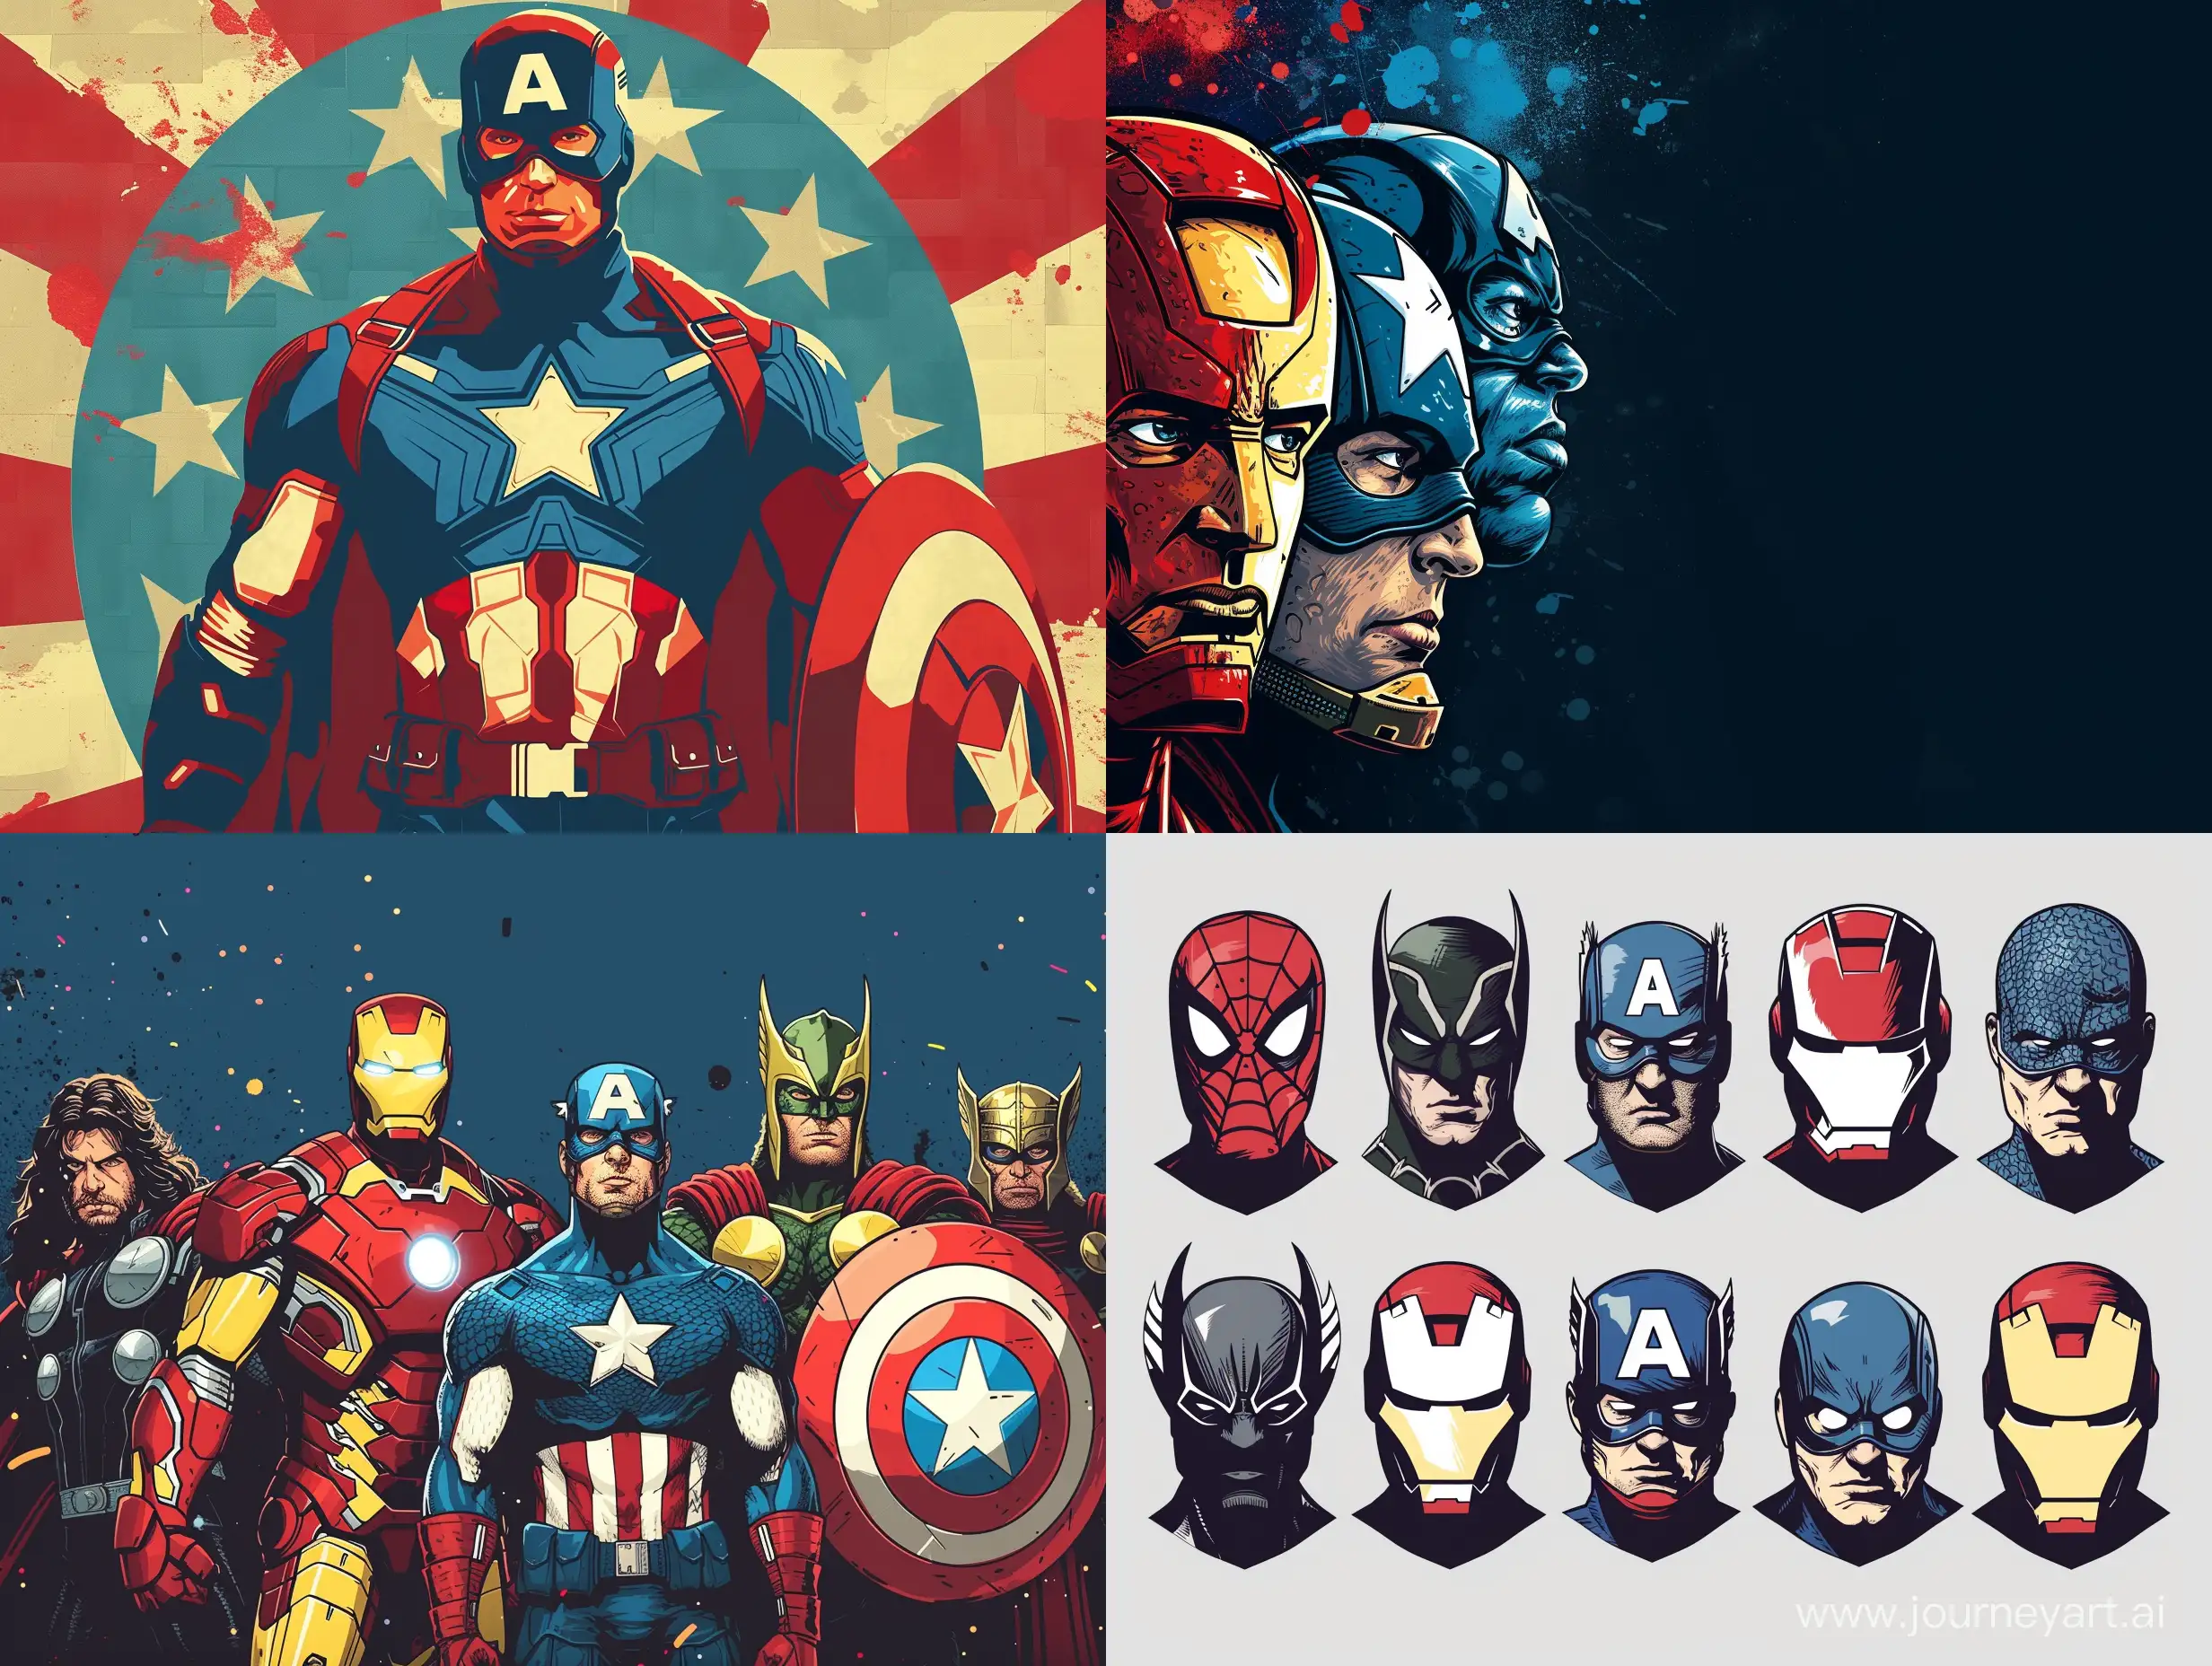 Dynamic-Marvel-Superhero-Poster-with-Striking-Graphics-and-Vector-Art